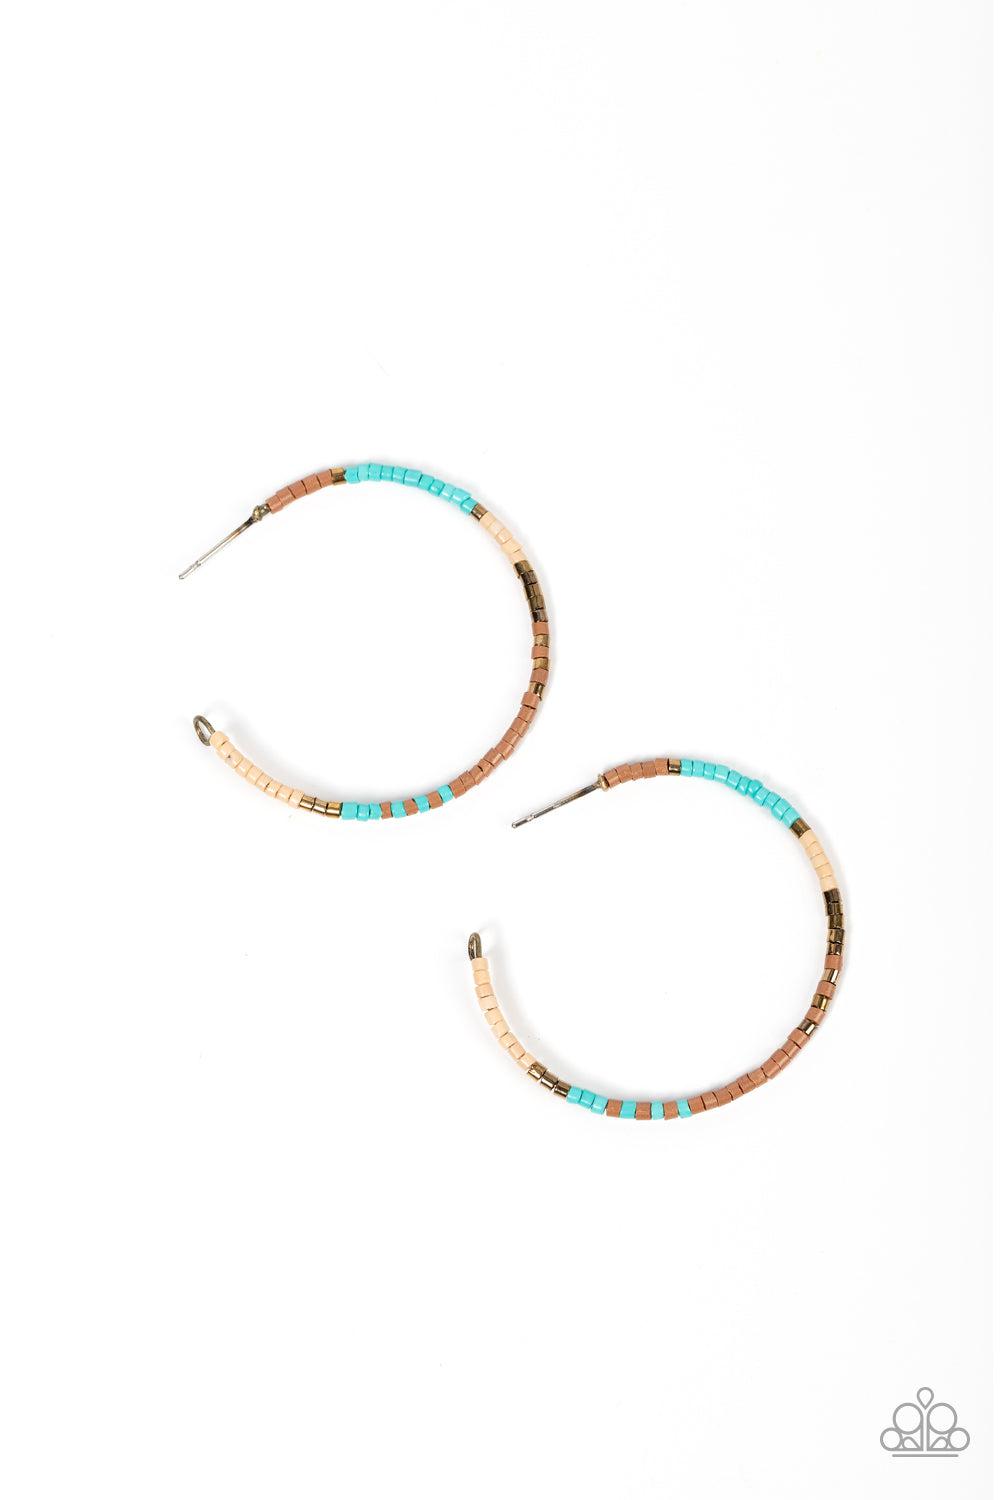 Joshua Tree Tourist Brass, Turquoise & Brown Hoop Earrings - Paparazzi Accessories- lightbox - CarasShop.com - $5 Jewelry by Cara Jewels